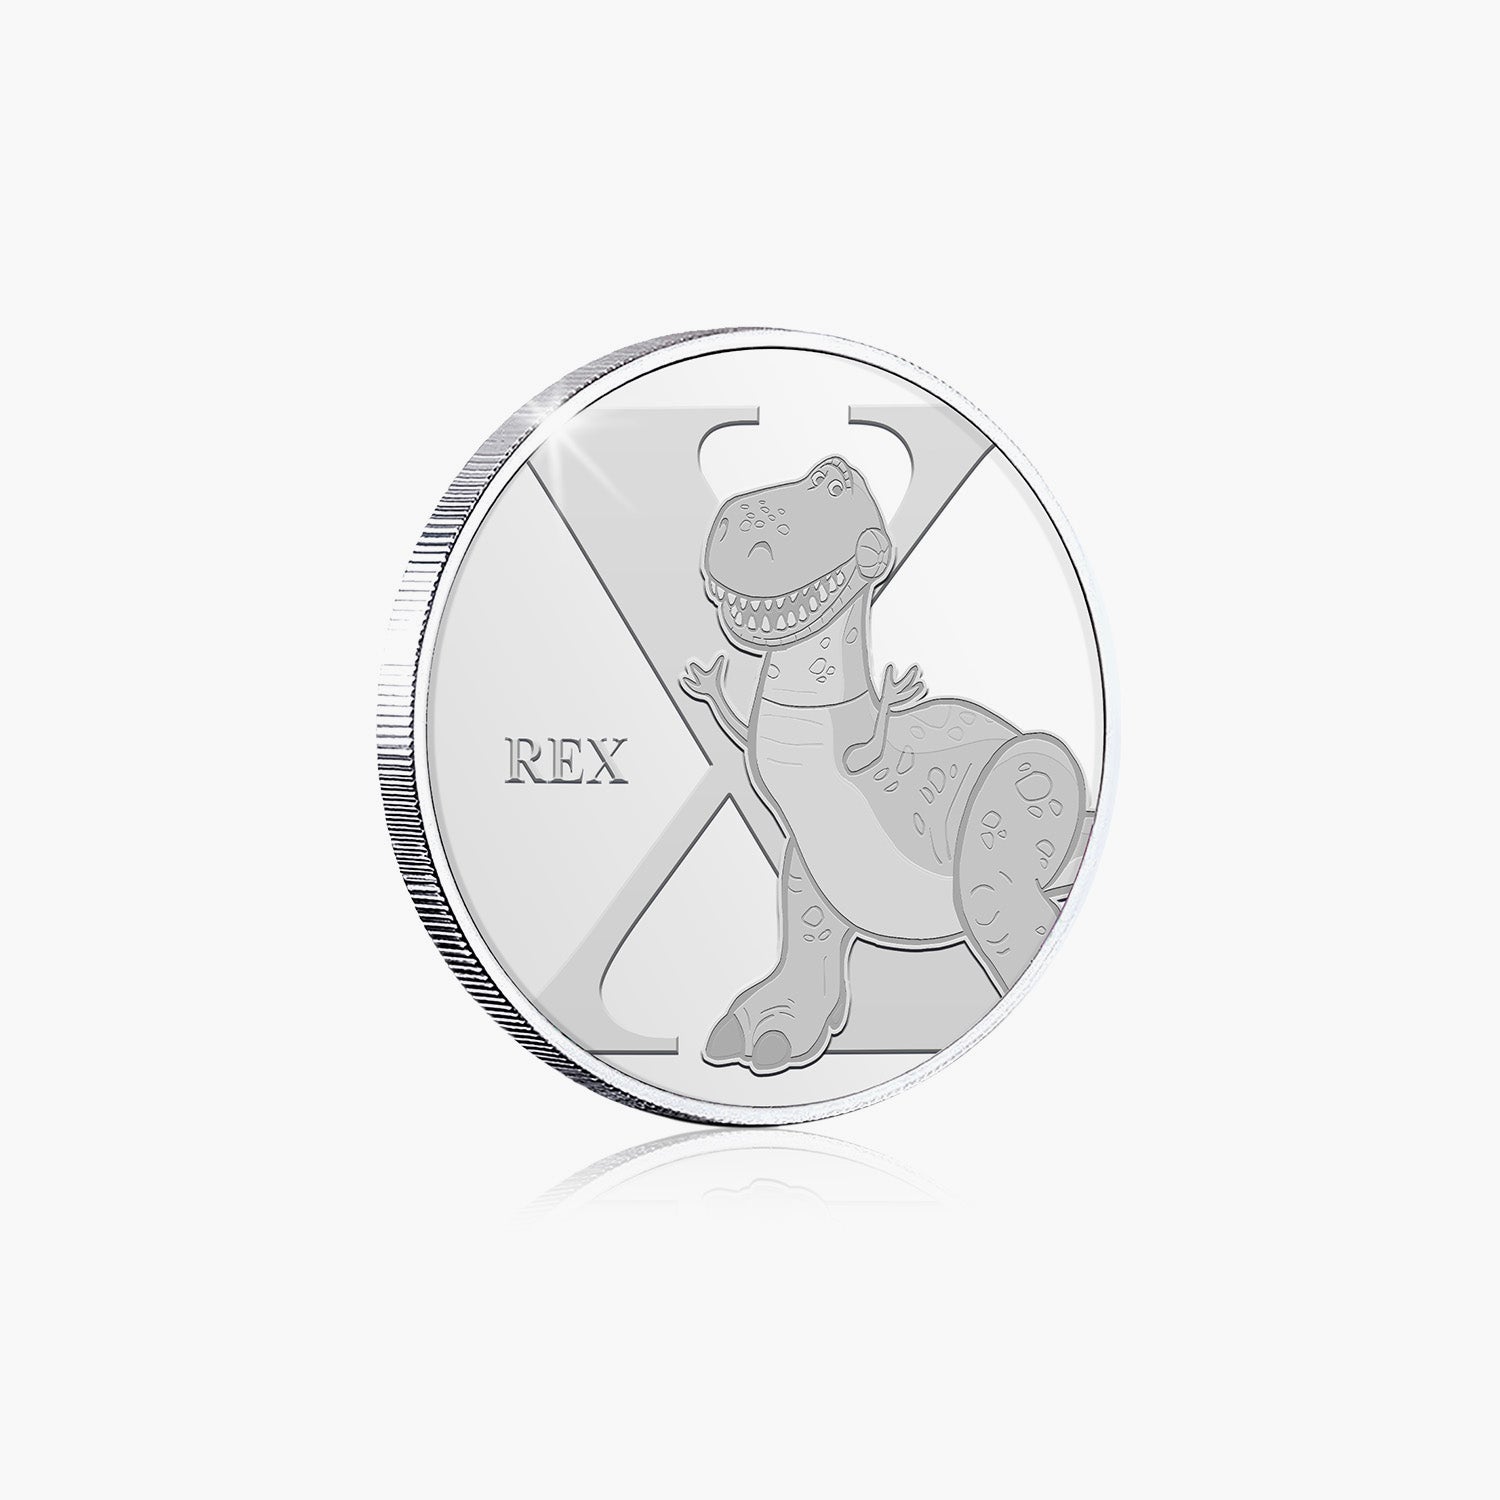 X Is For Rex Silver-Plated Commemorative